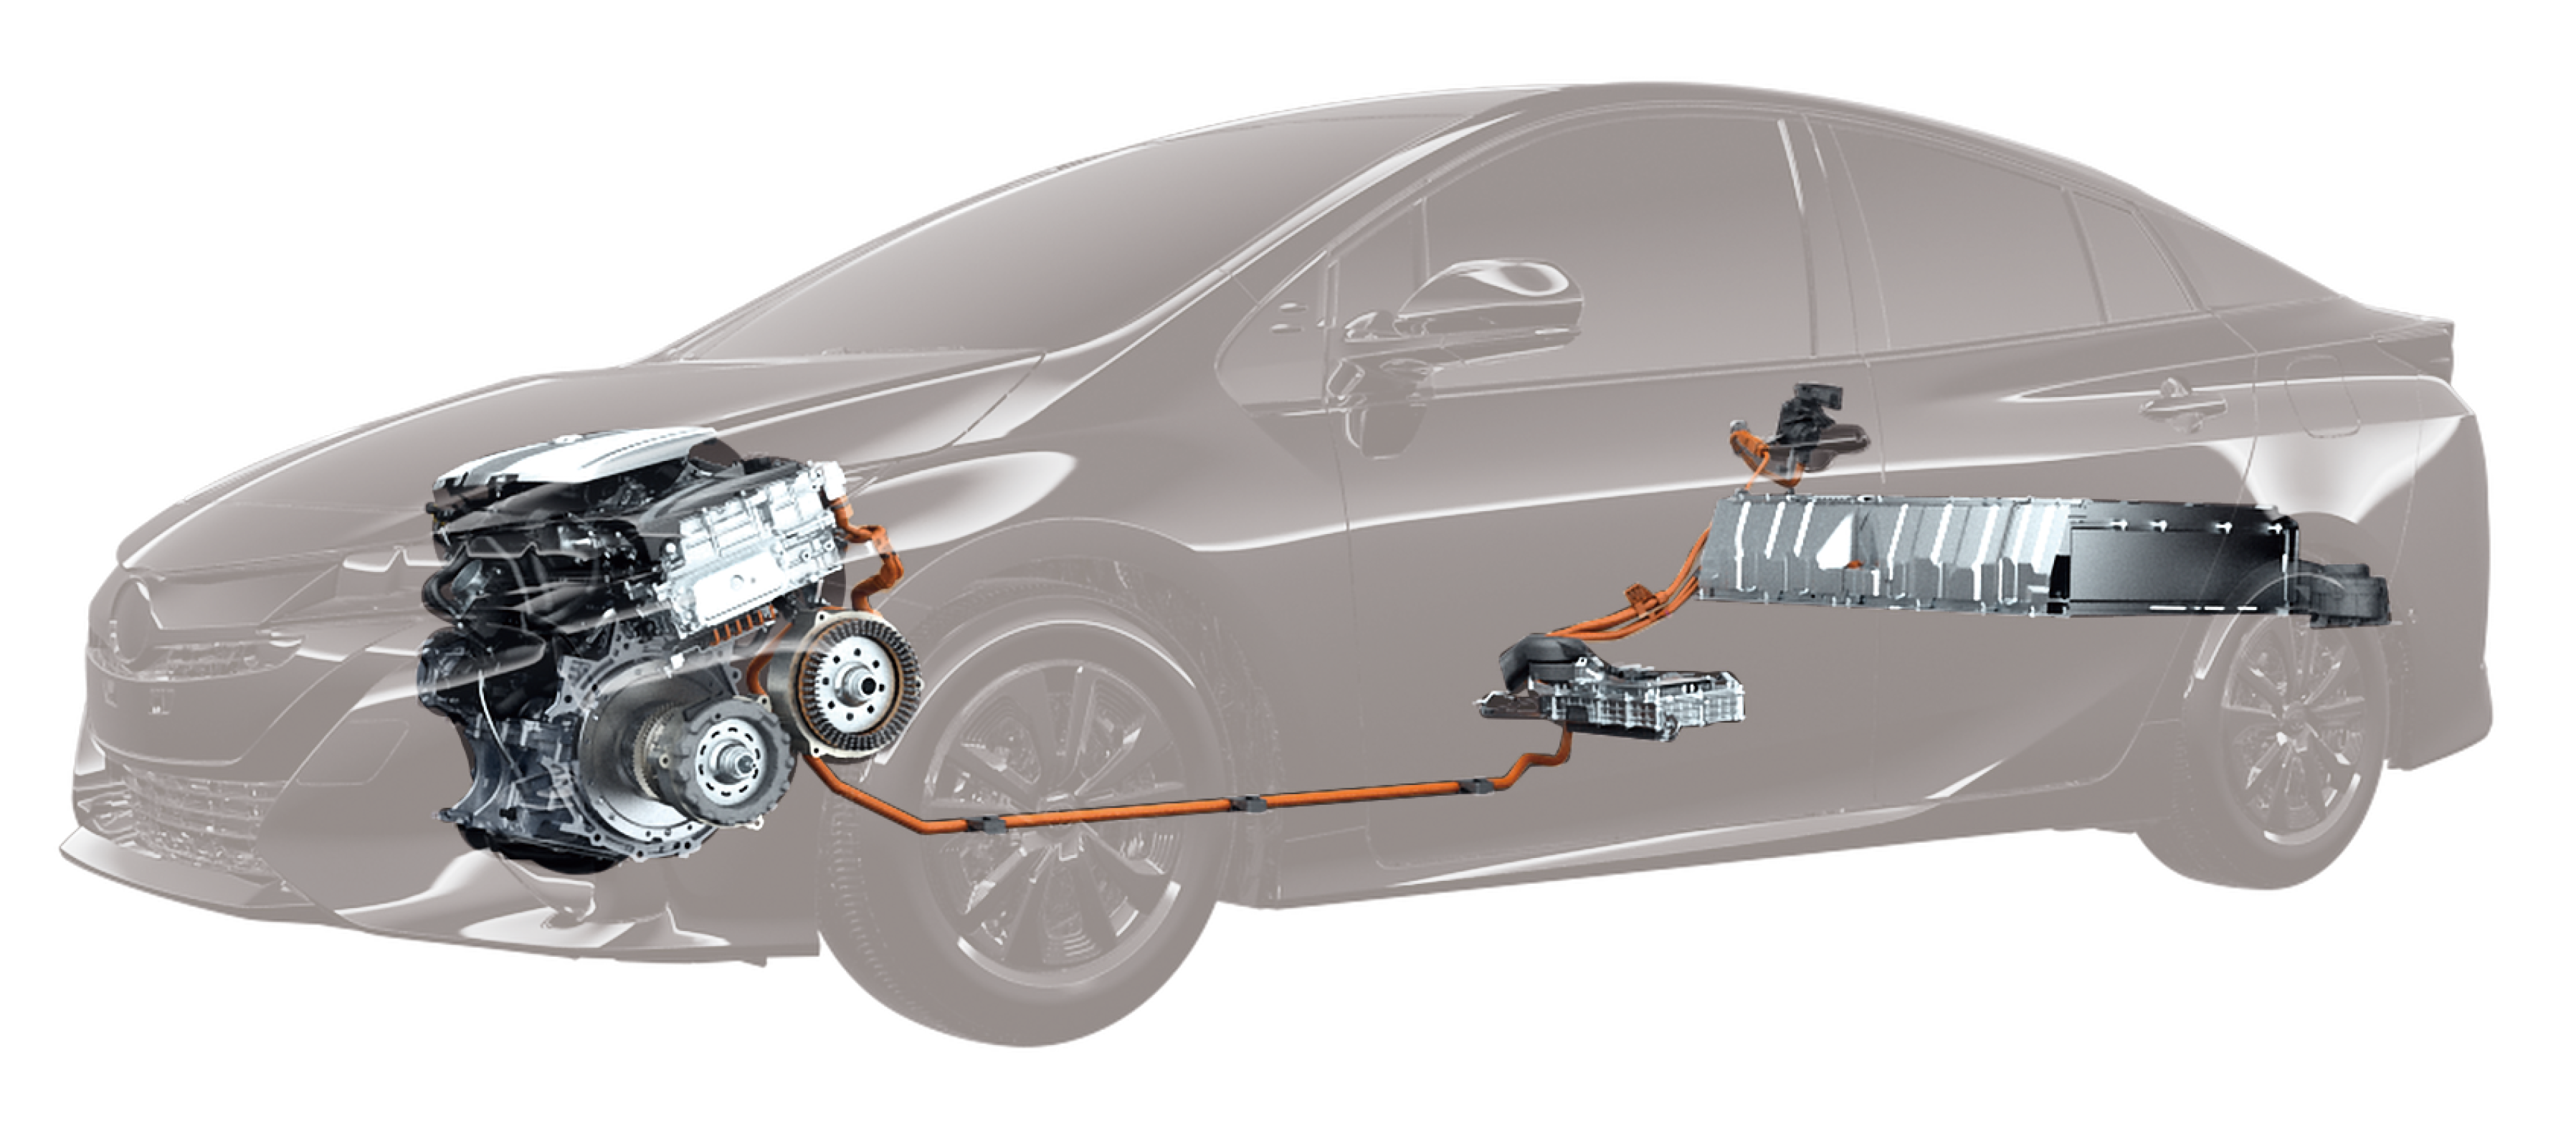 The system for plugin hybrid vehicles